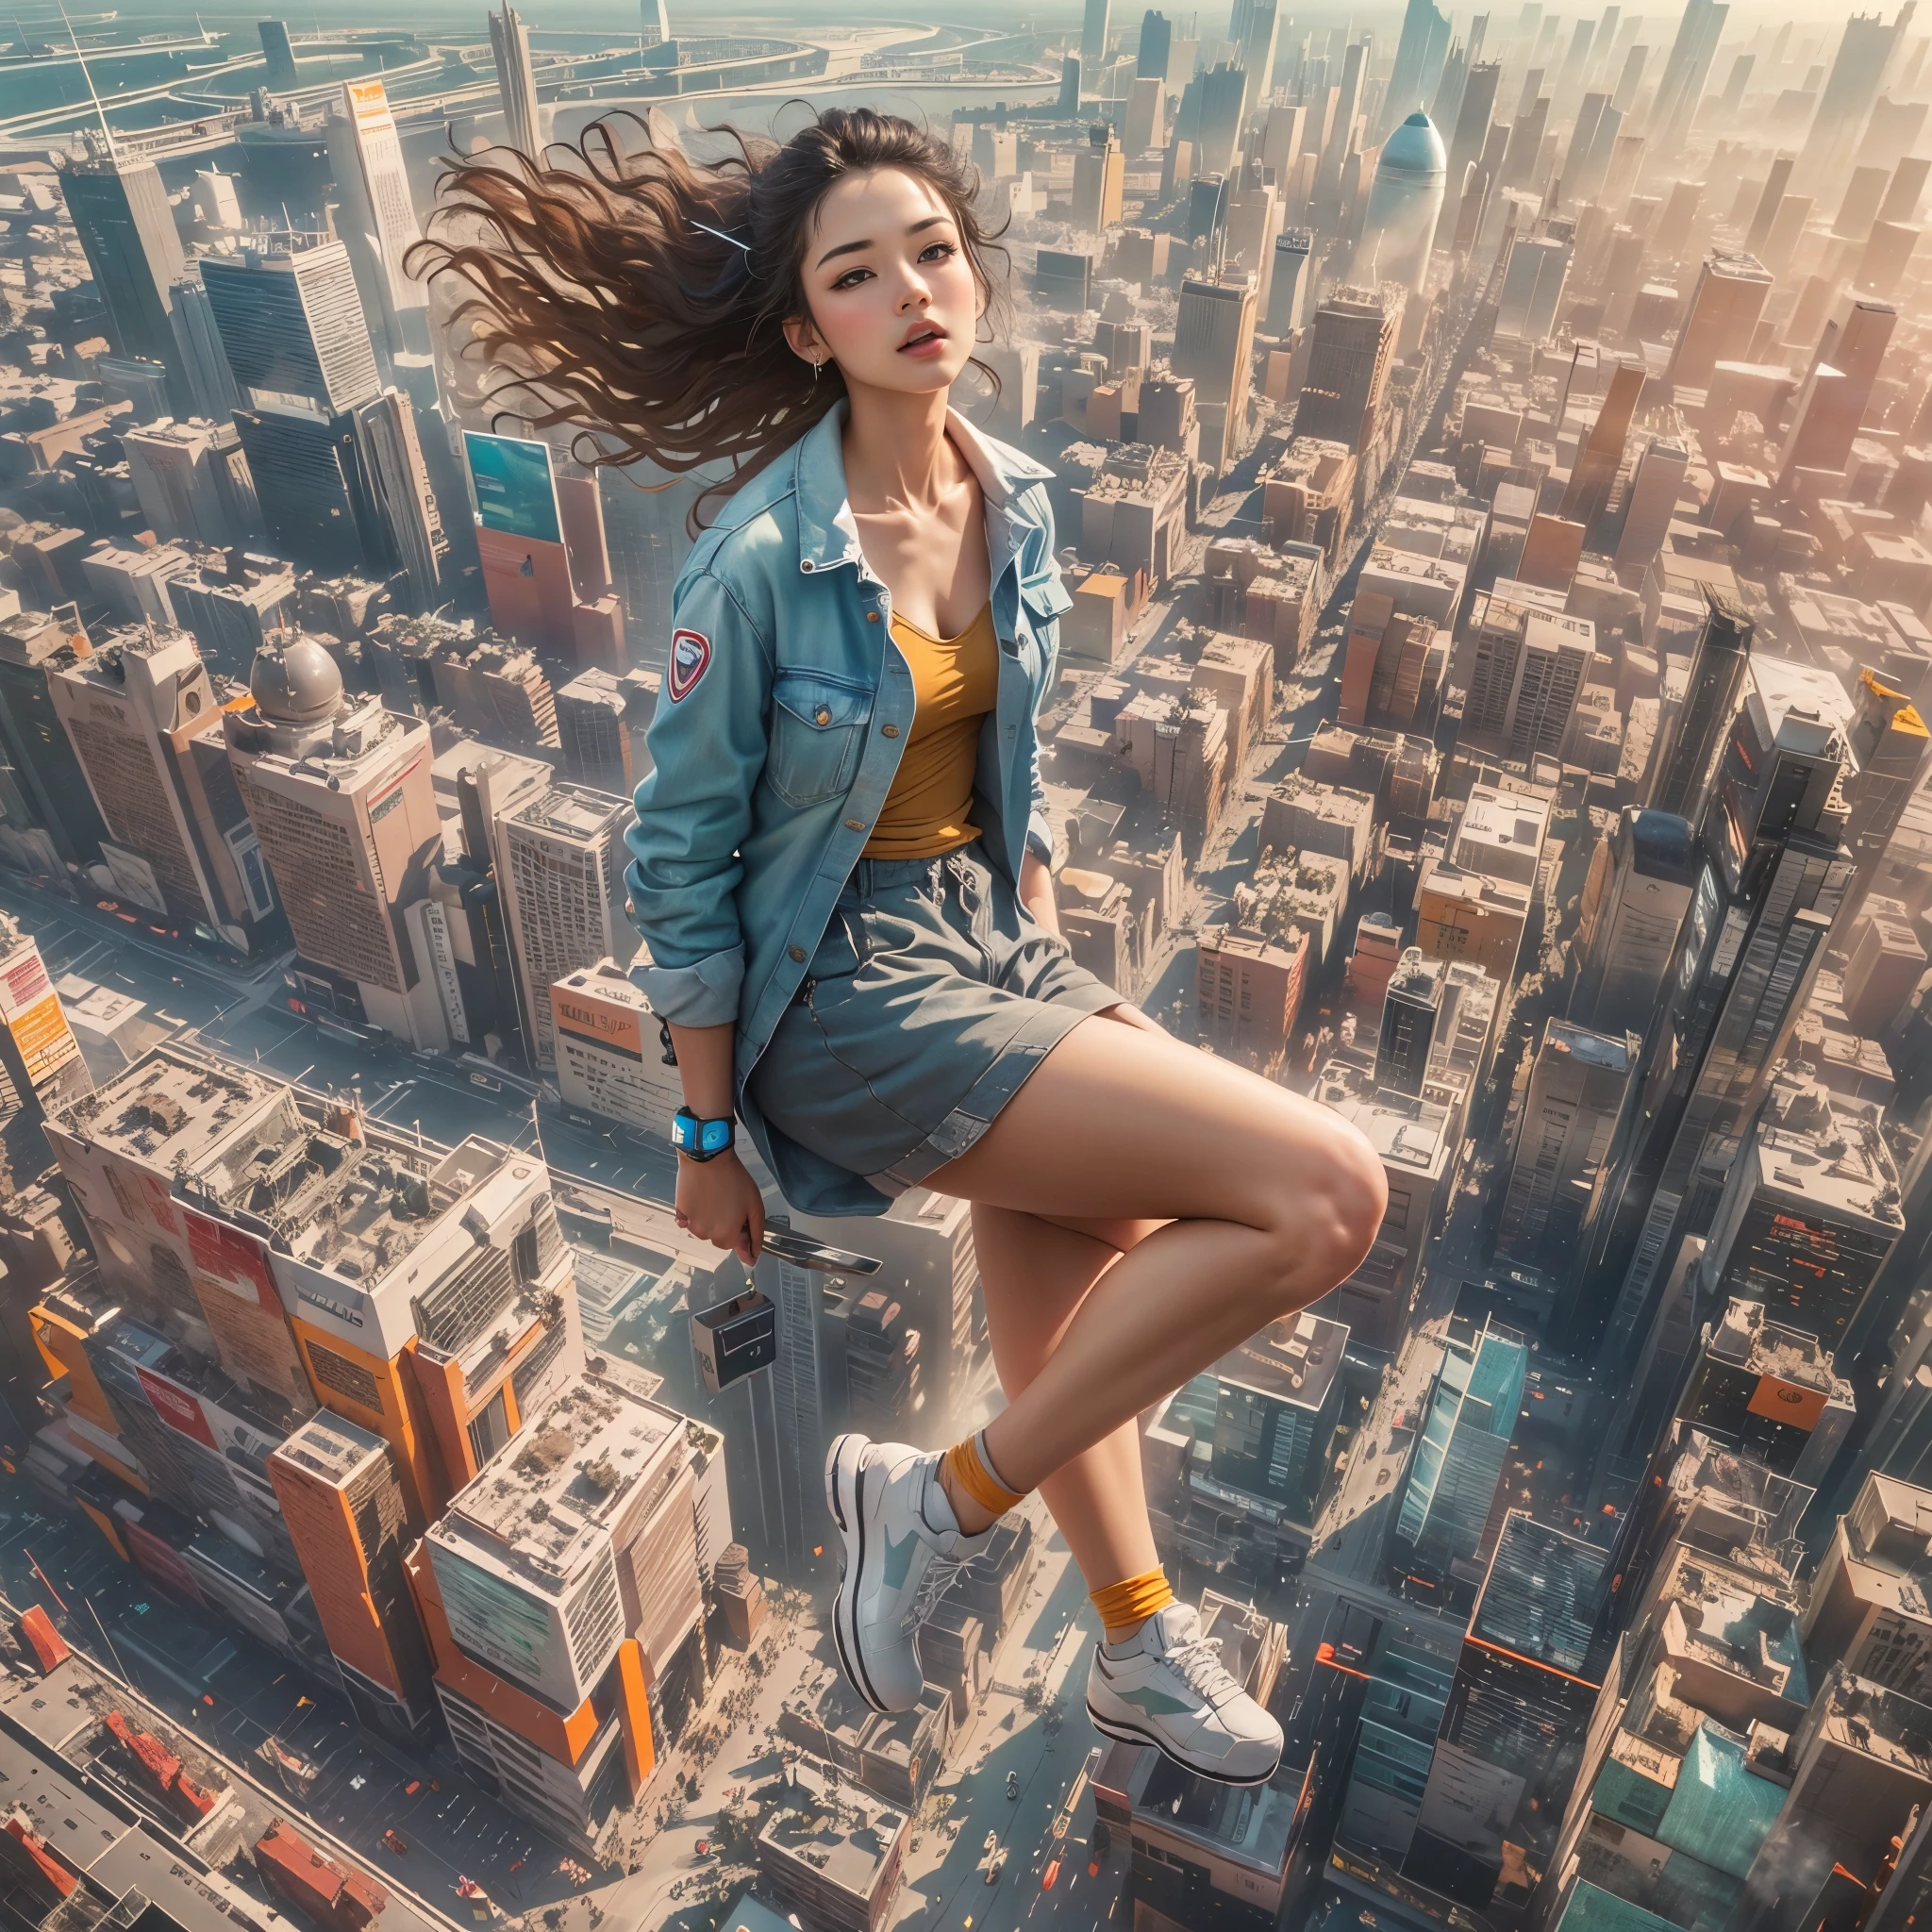 (ultra-detailed, masterpiece:1.2), extremely detailed artwork, best quality, high-resolution, hyper-realistic:1.37, attractive girl, breathtaking leap, background cityscape